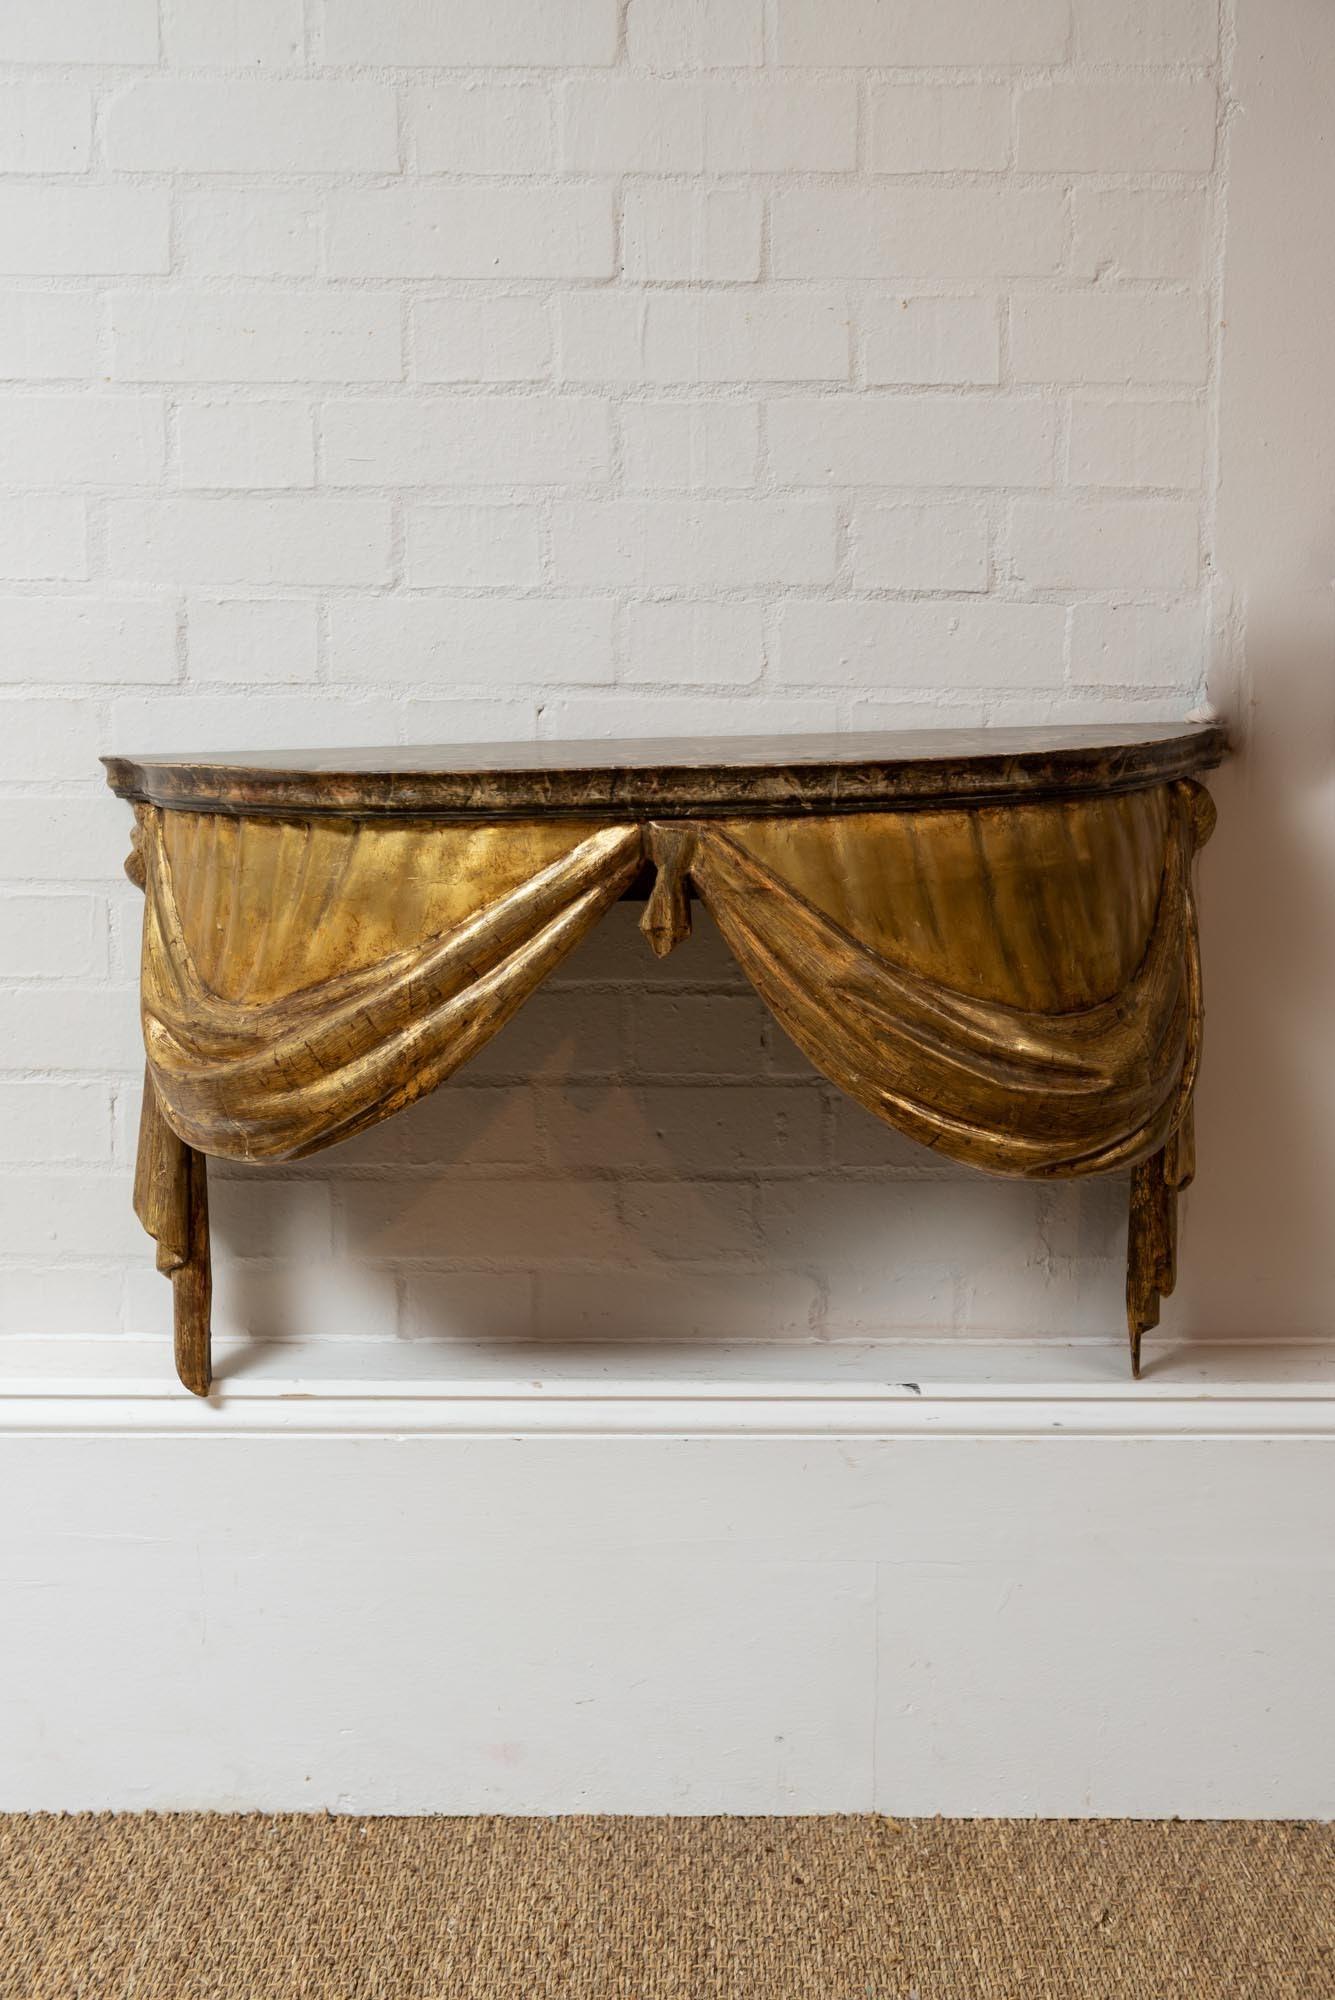 A highly decorative and unusual console table from the late 19th century. The console features a faux marble painted top with a beautifully crafted gilded and painted draped and swagged front. The wall hanging console fixes directly onto the wall.